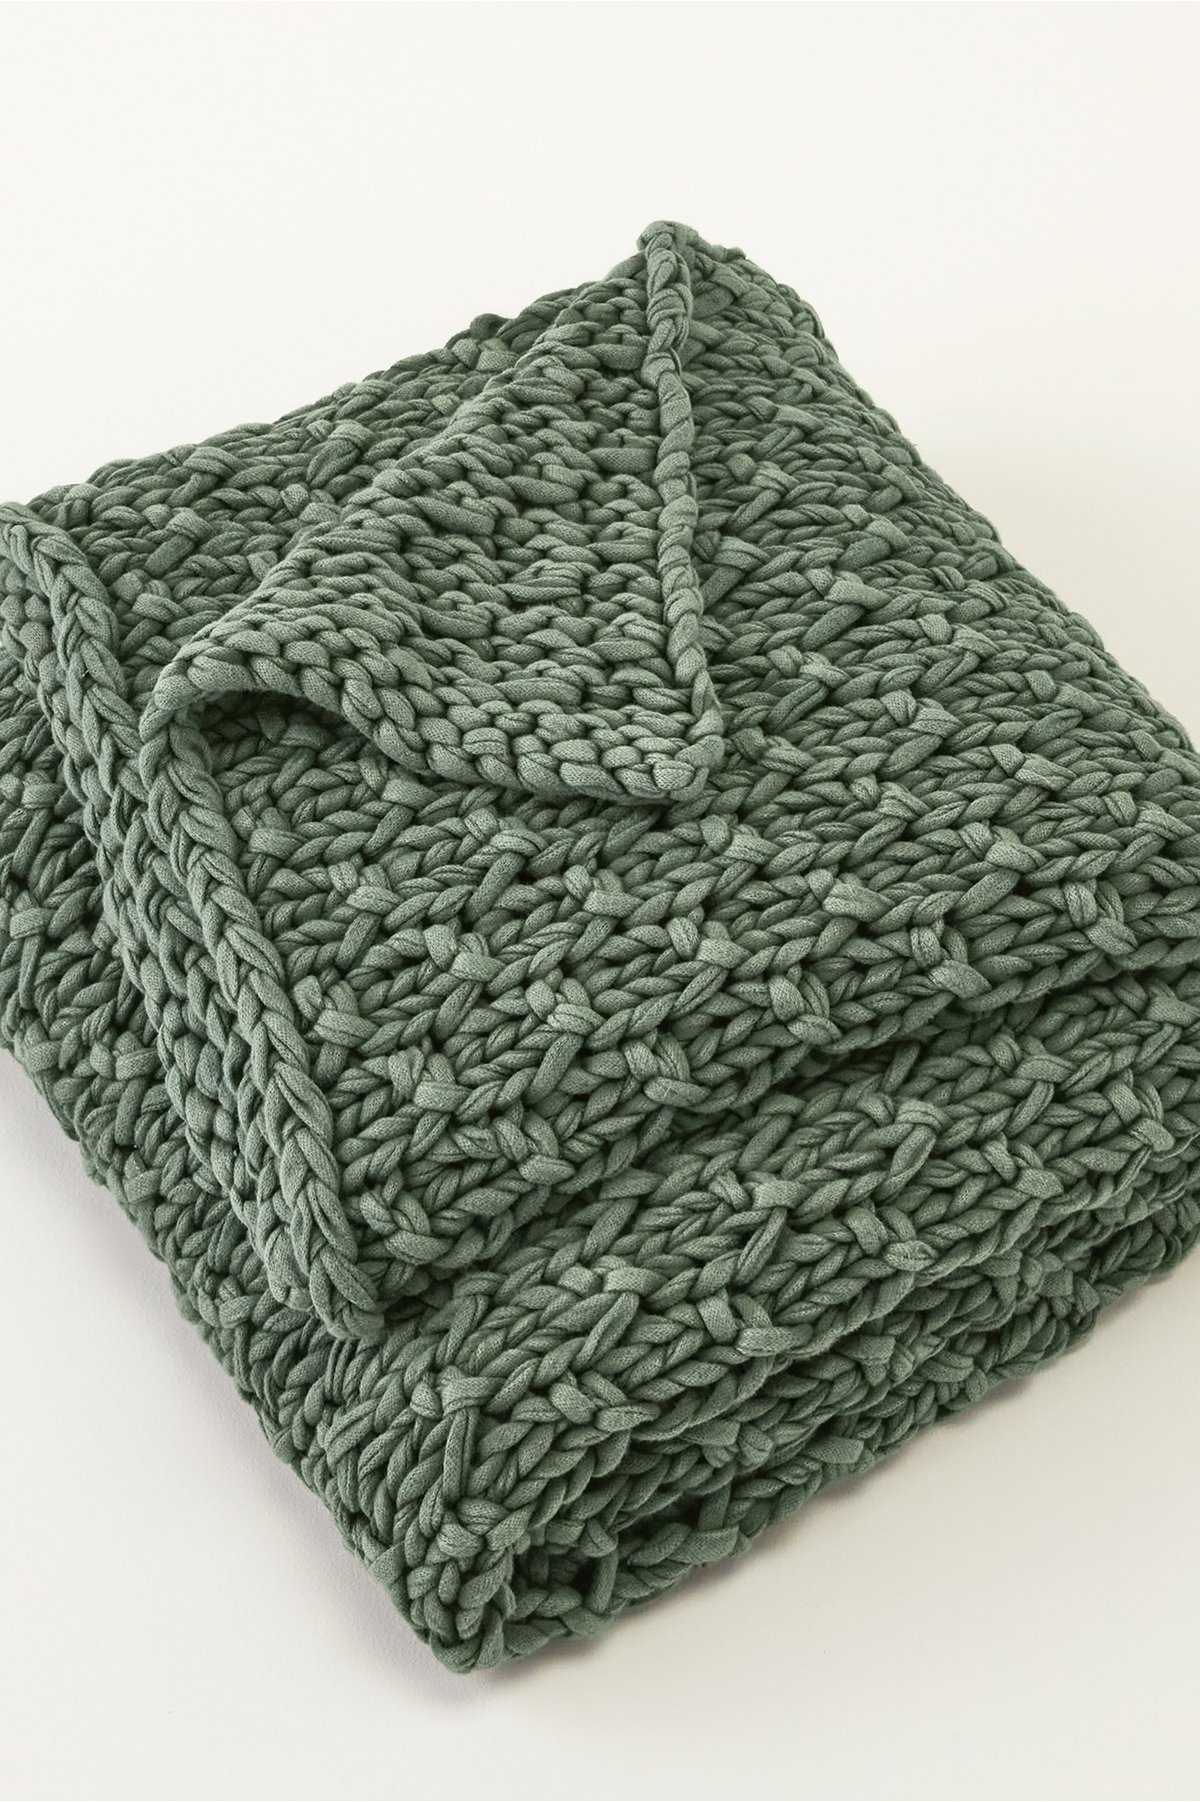 Kali Knit Throw Blanket by Soft Surroundings, in Kale